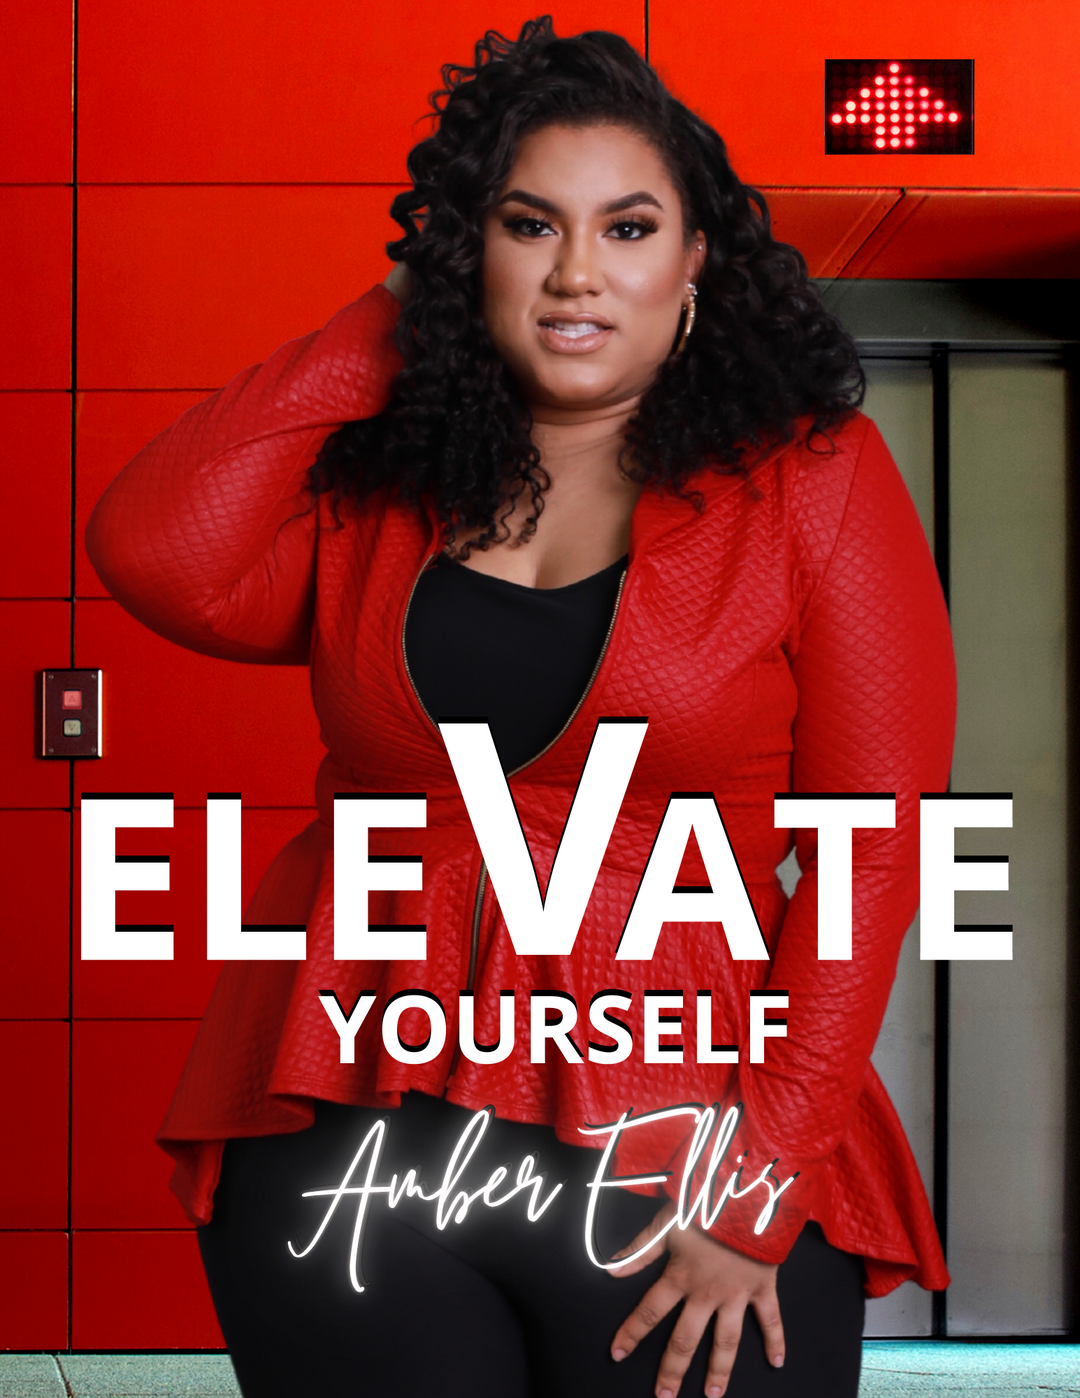 Elevate Yourself! 🔺 By Amber Ellis